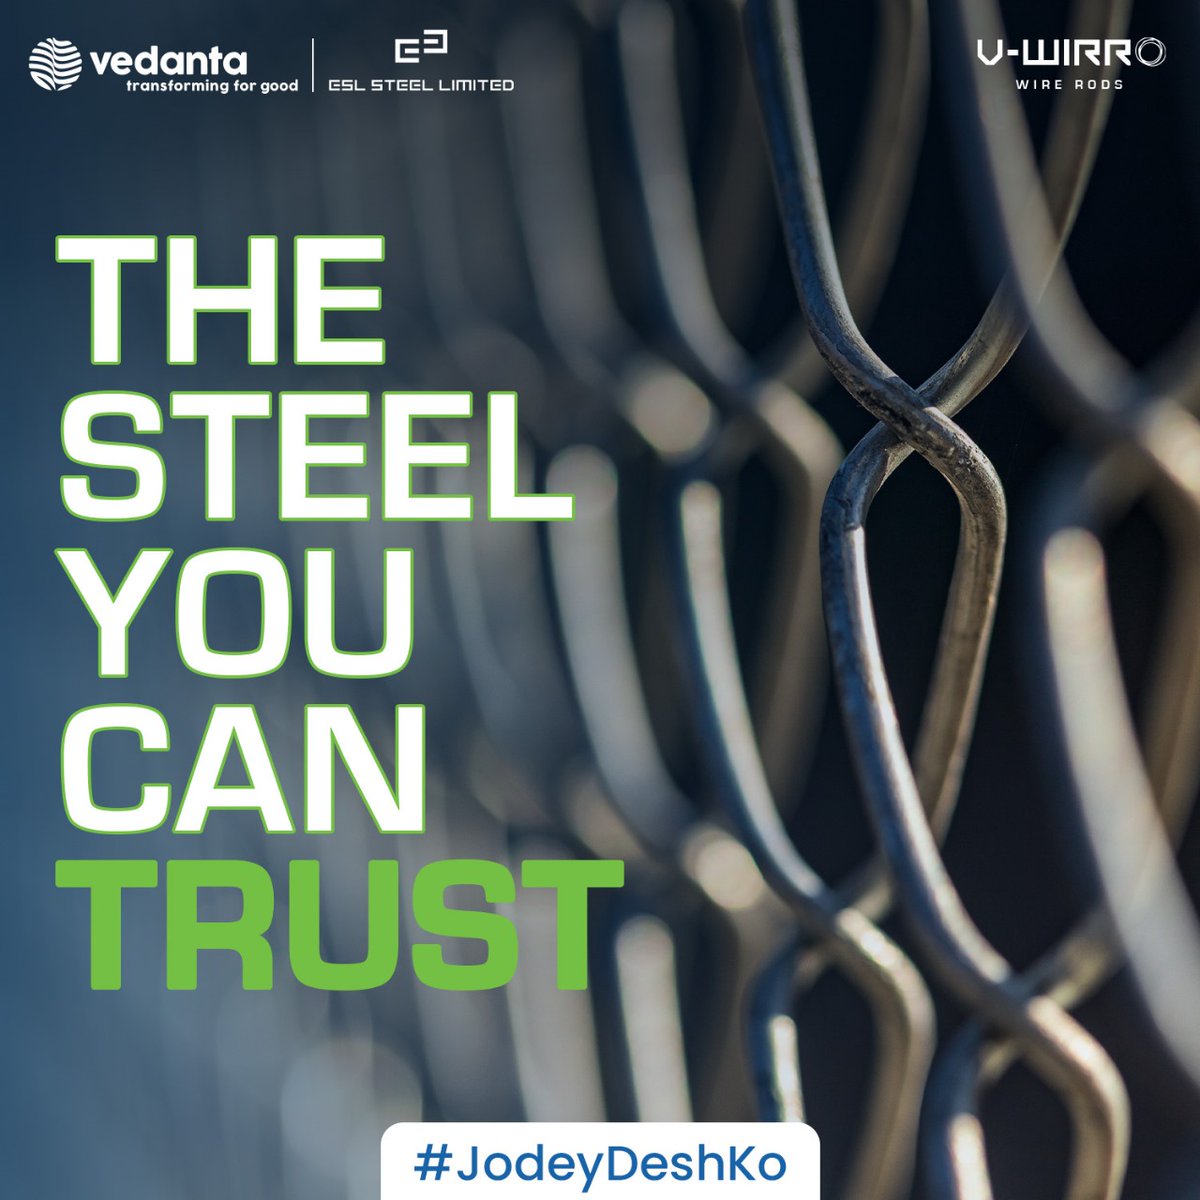 When your project demands strength and reliability, turn to V-Wirro wire rods. Trust the strength!

#BuiltOnTrust #SteelInnovations #VWirro #JodeyDeshKo #ESLCares #TransformingForGood